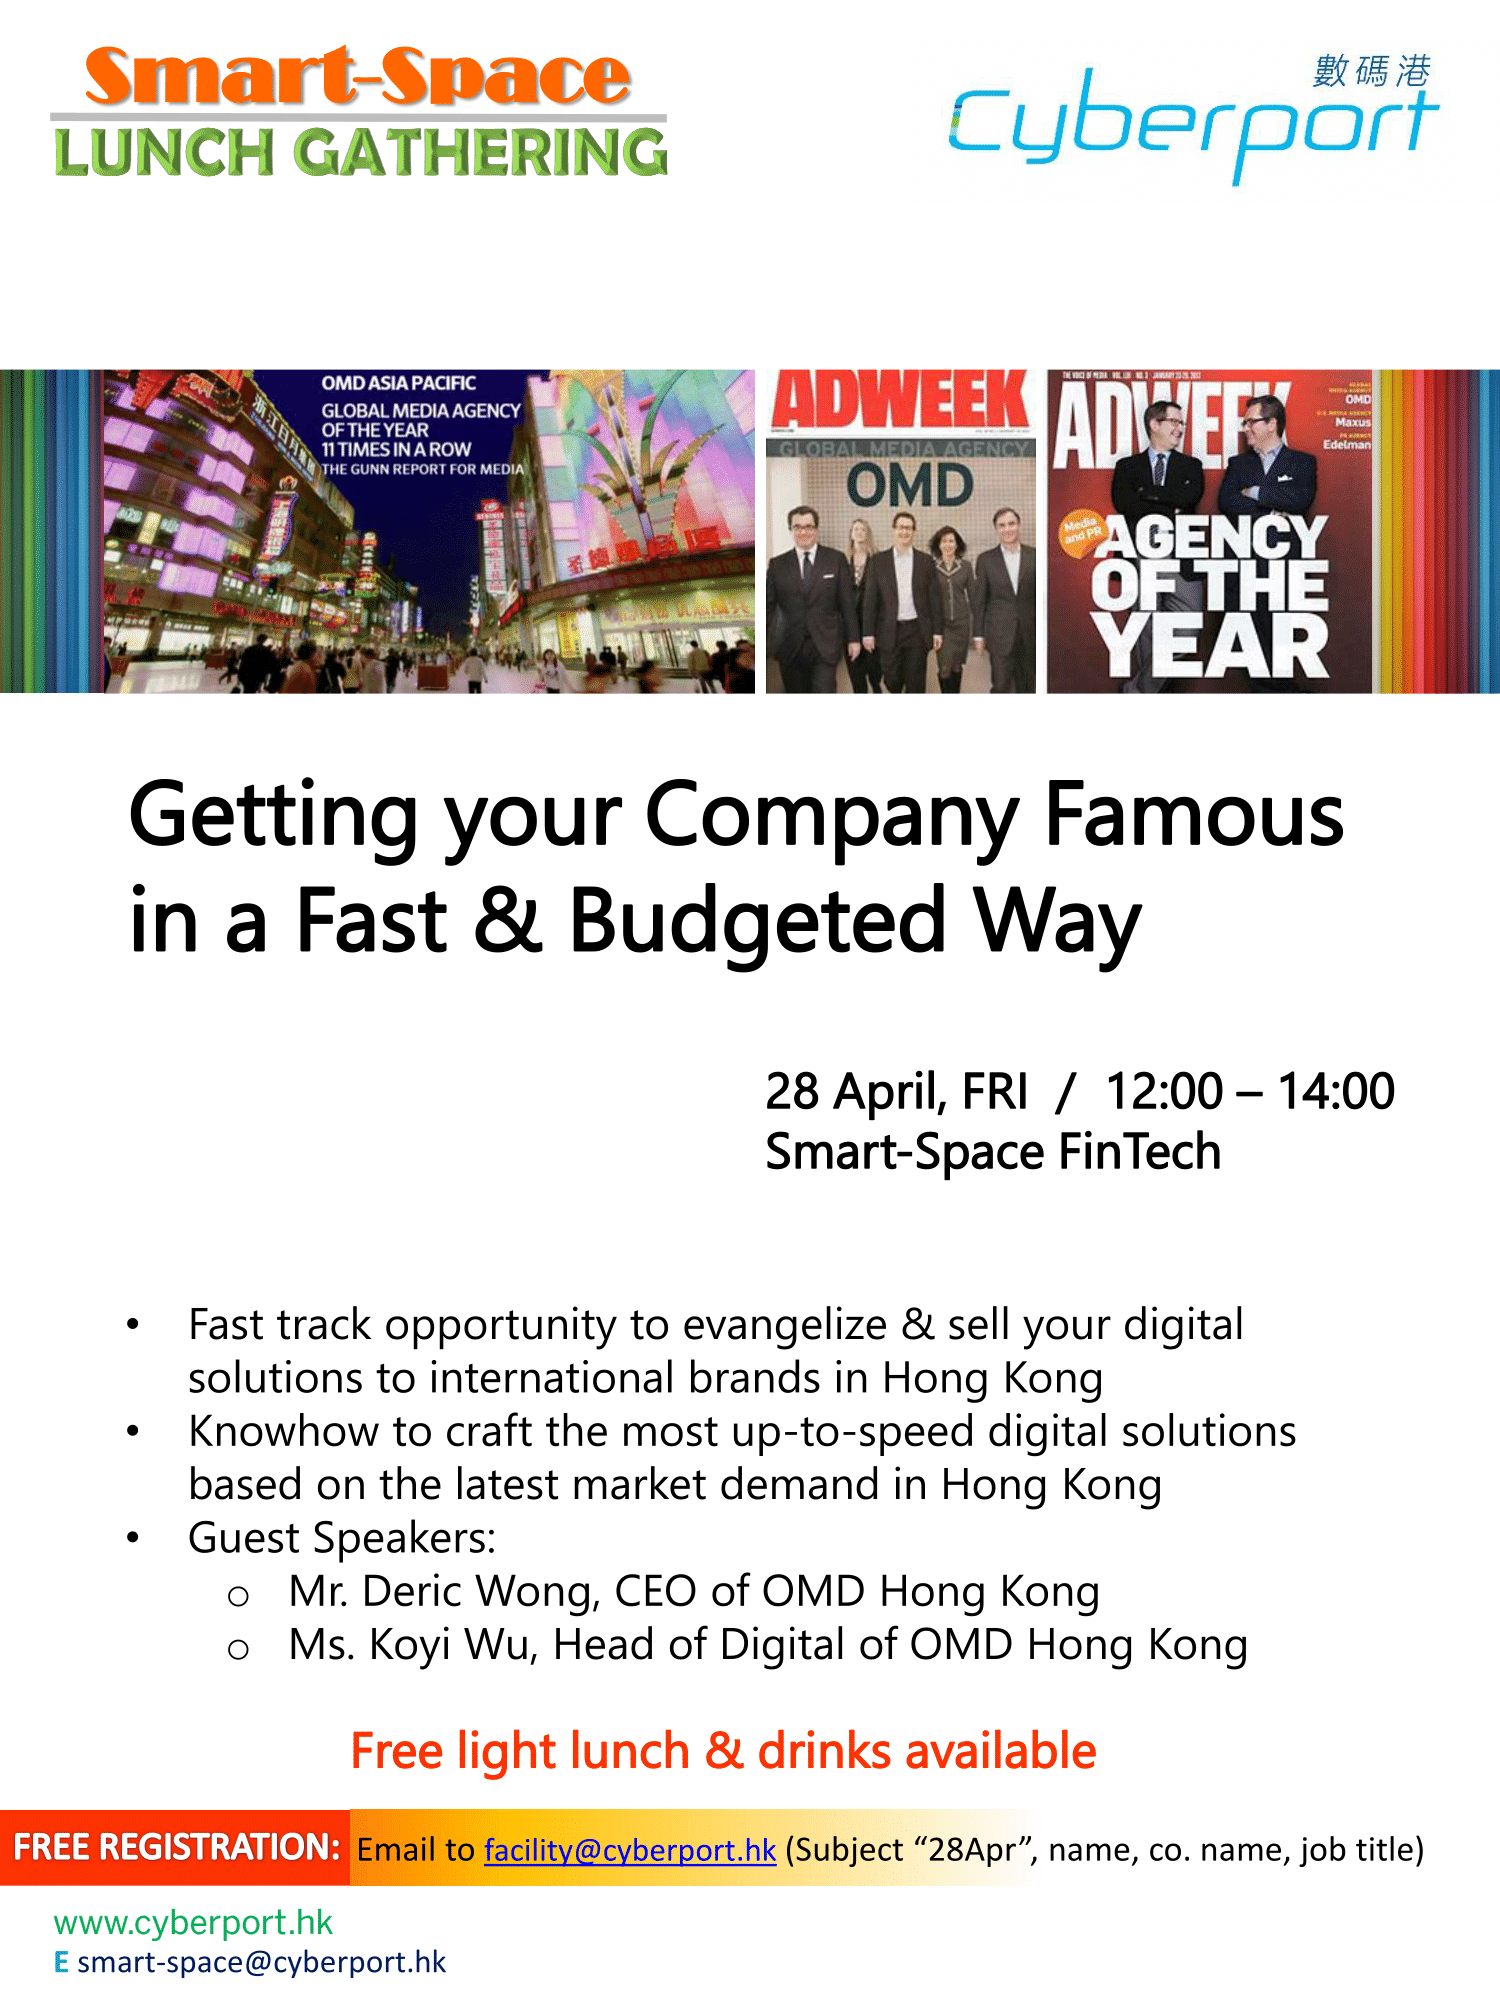 Smart-Space Lunch Gathering: Getting your Company Famous in a Fast & Budgeted Way